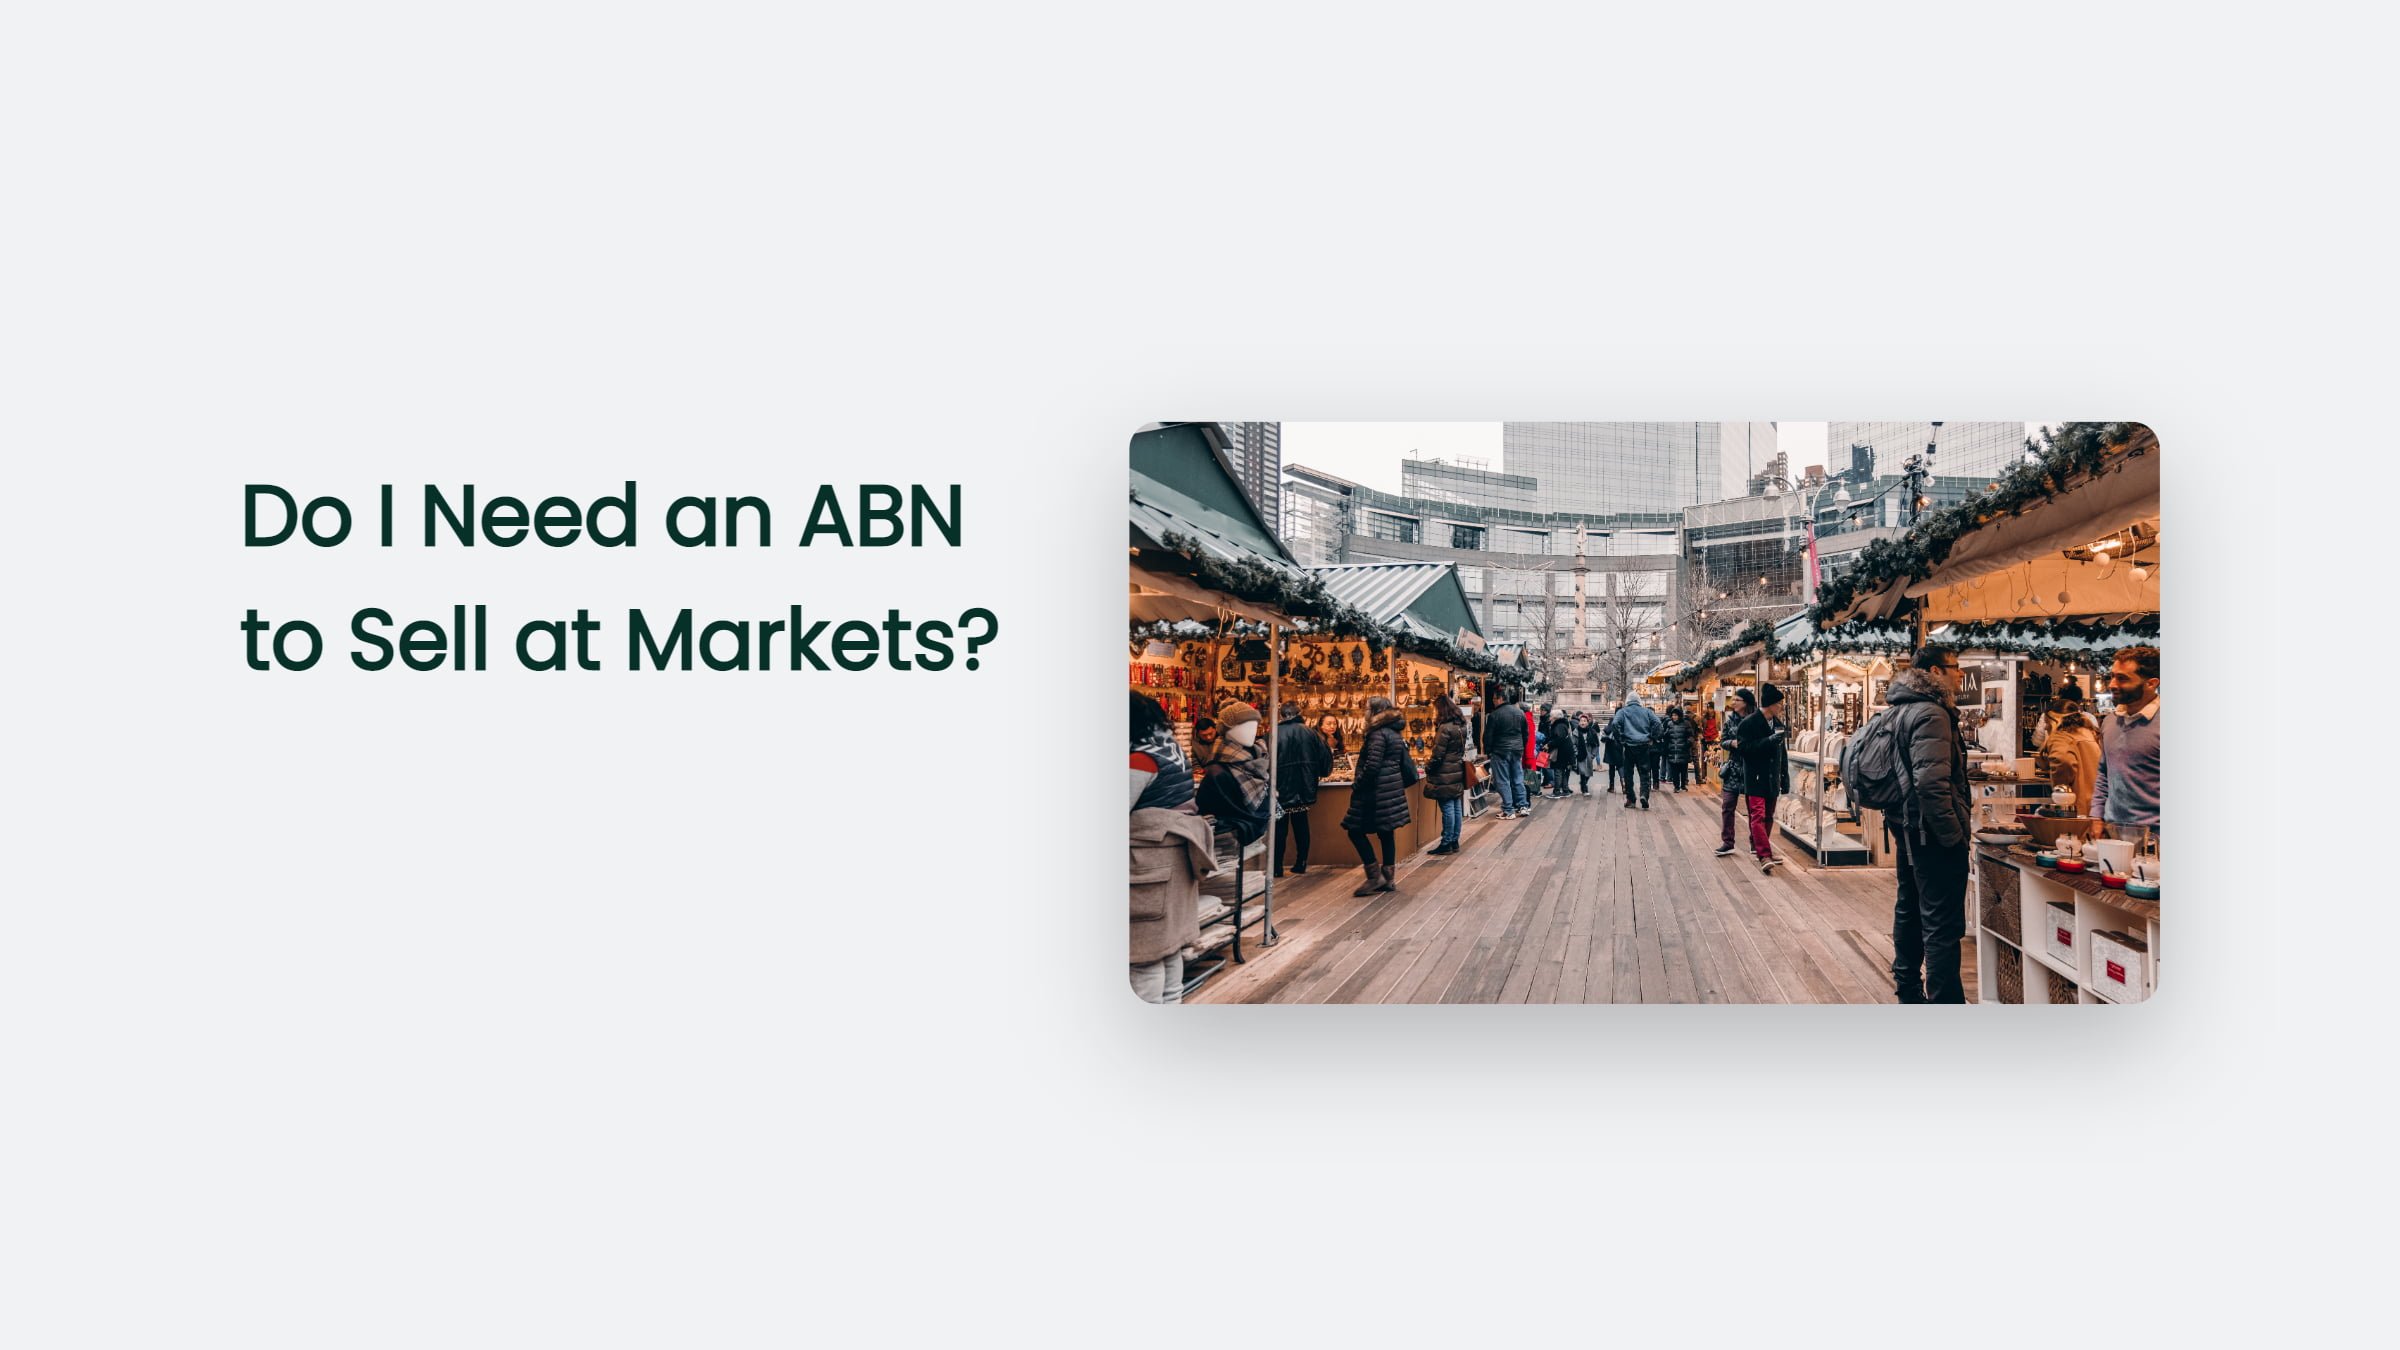 Do I Need A Abn To Sell A Markets?